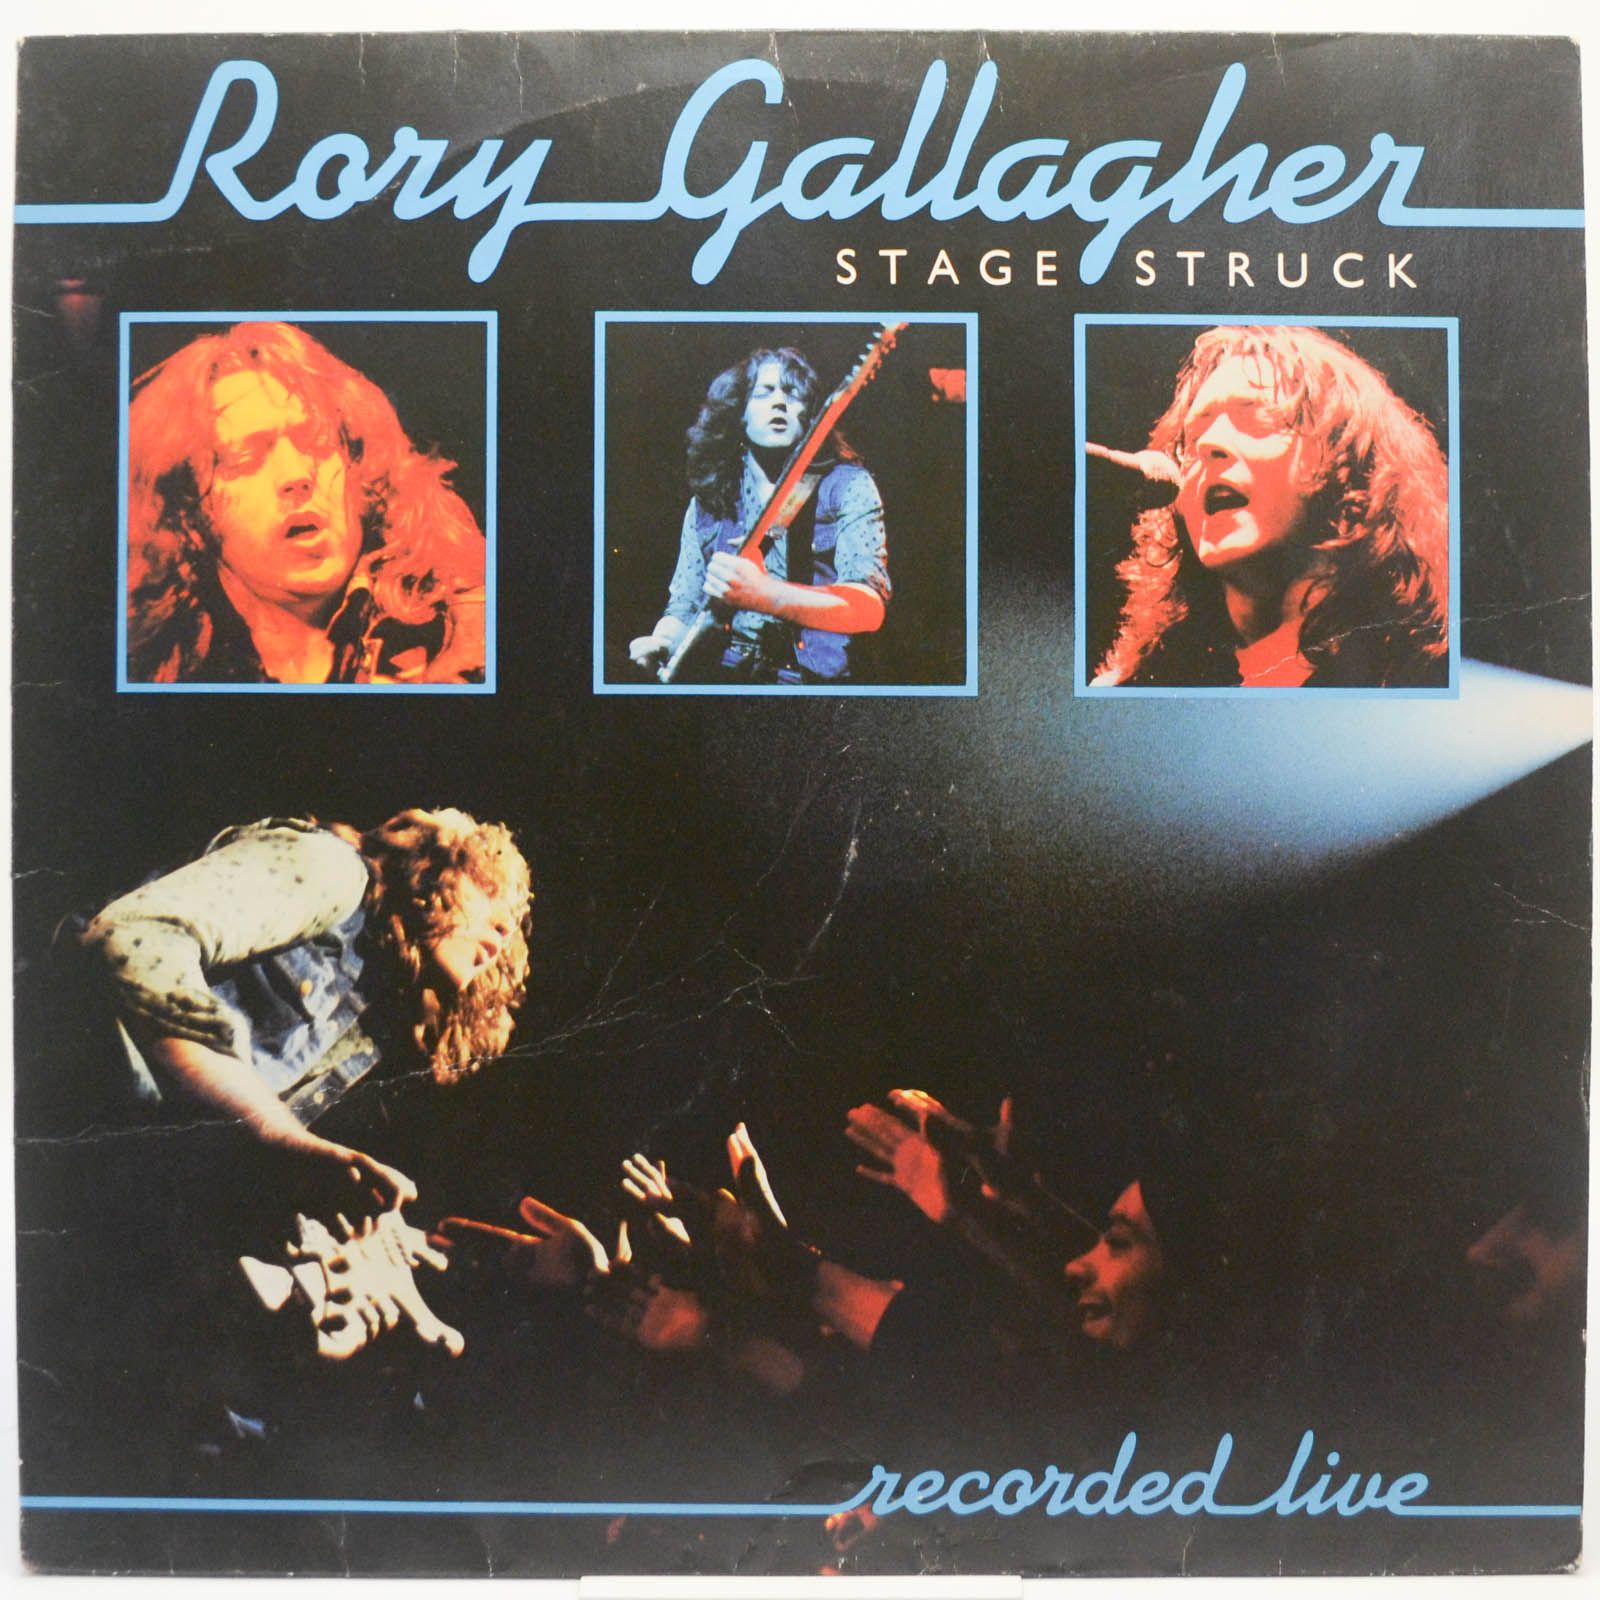 Rory Gallagher — Stage Struck, 1980